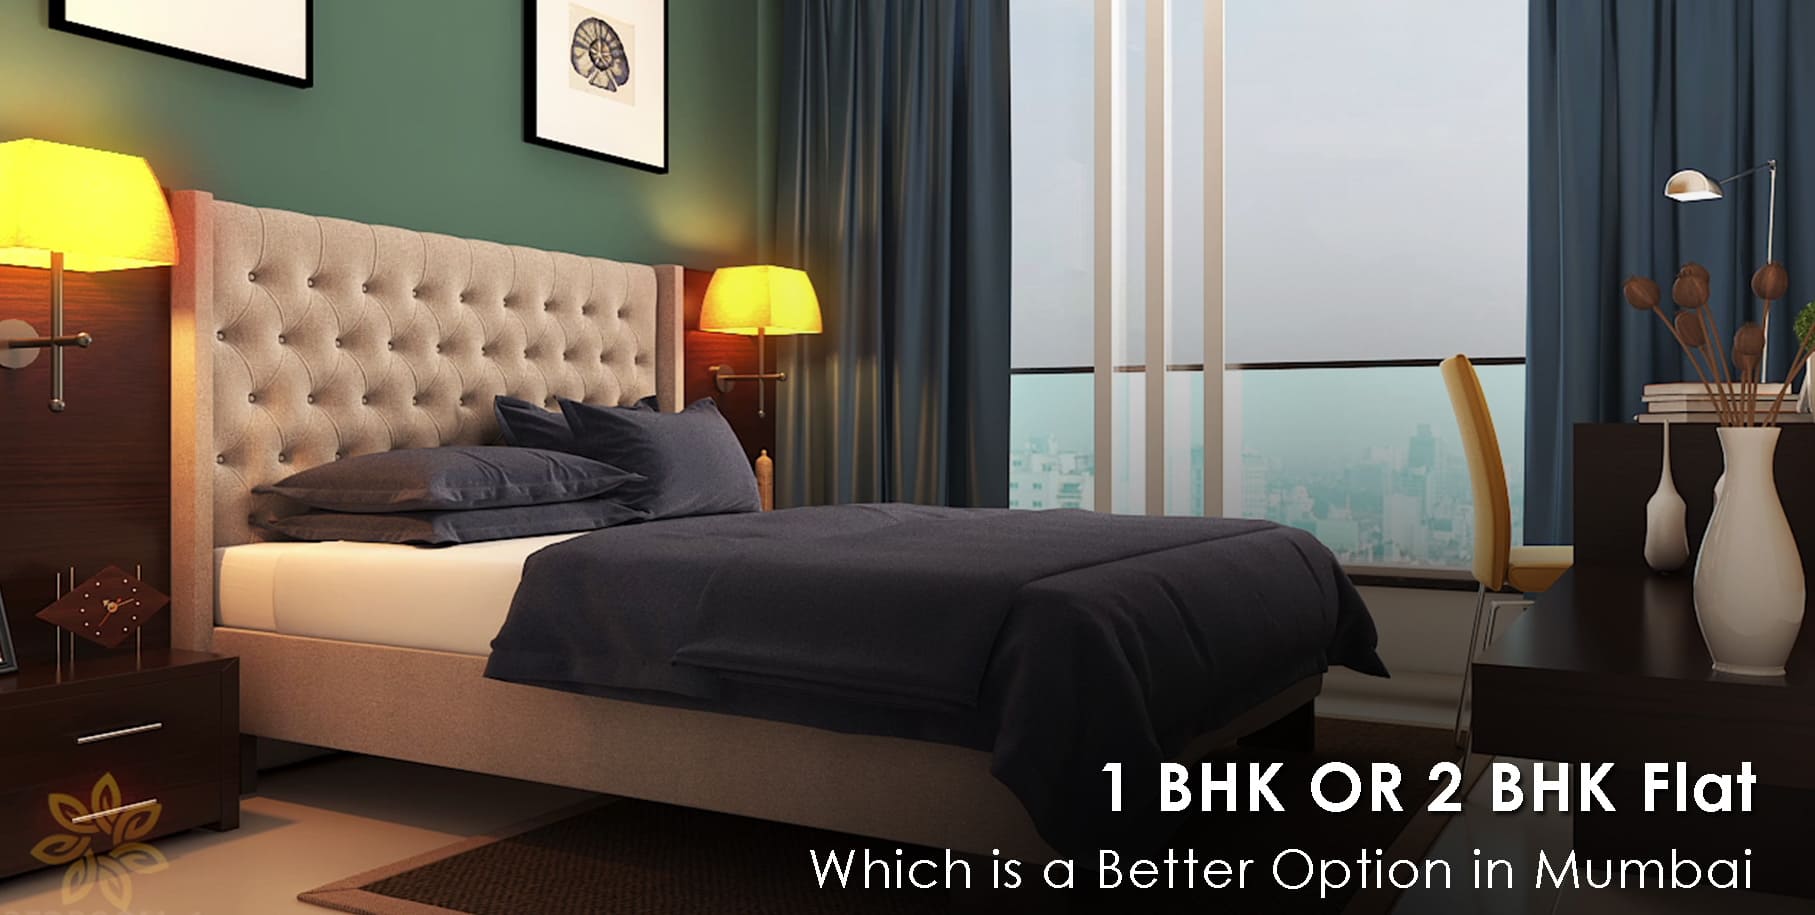 1 BHK OR 2 BHK Flat – Which is a Better Option in Mumbai?